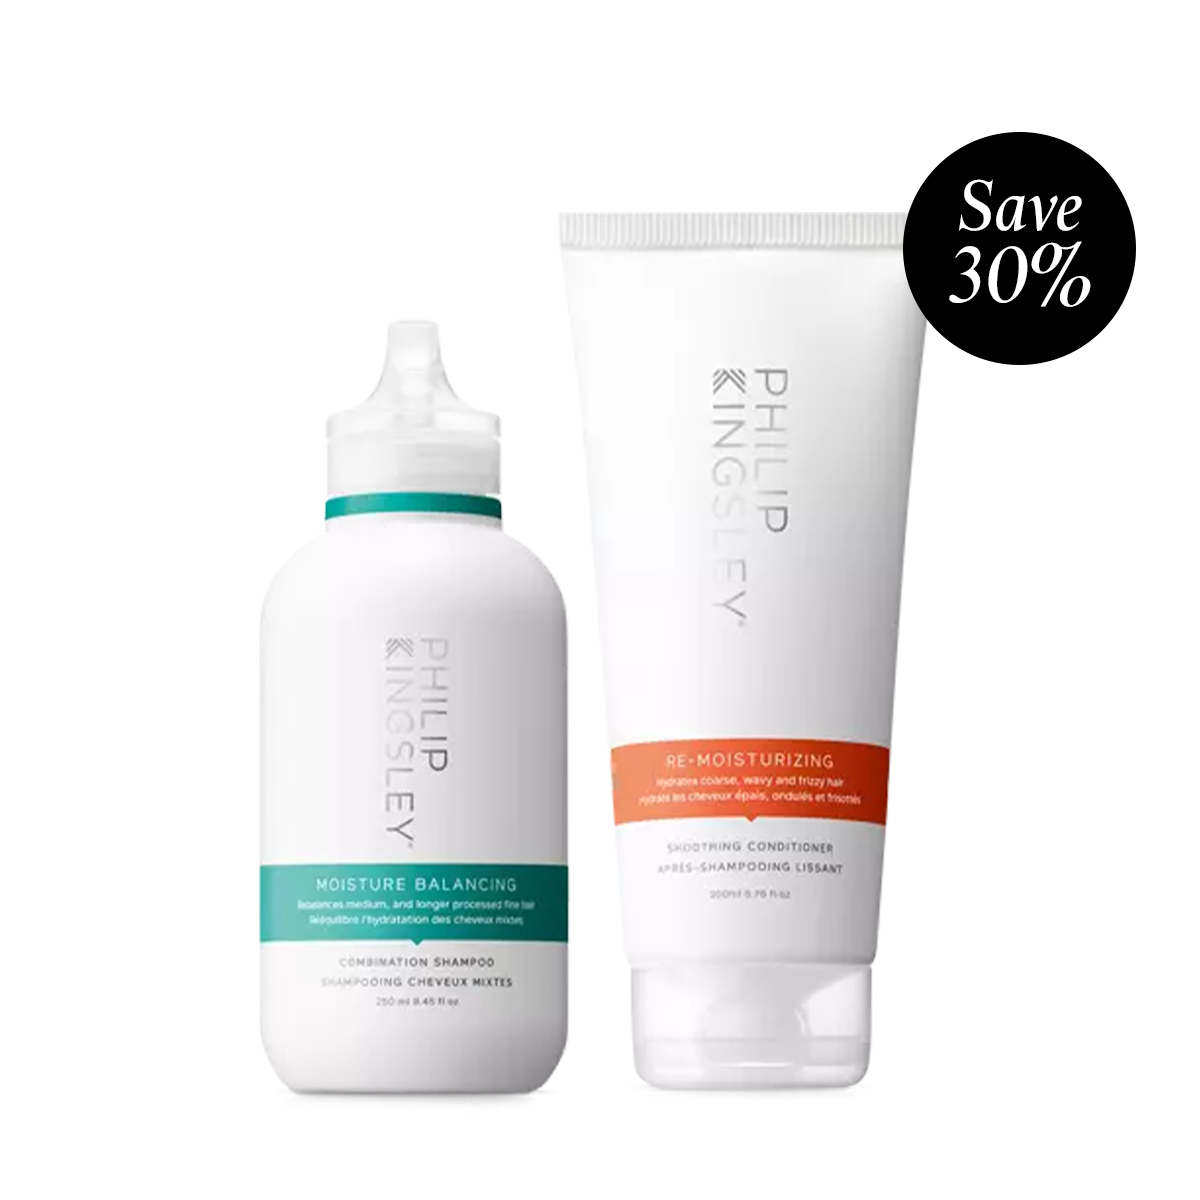 Moisture Balancing Shampoo and Re-Moisturizing Conditioner Discovery Duo